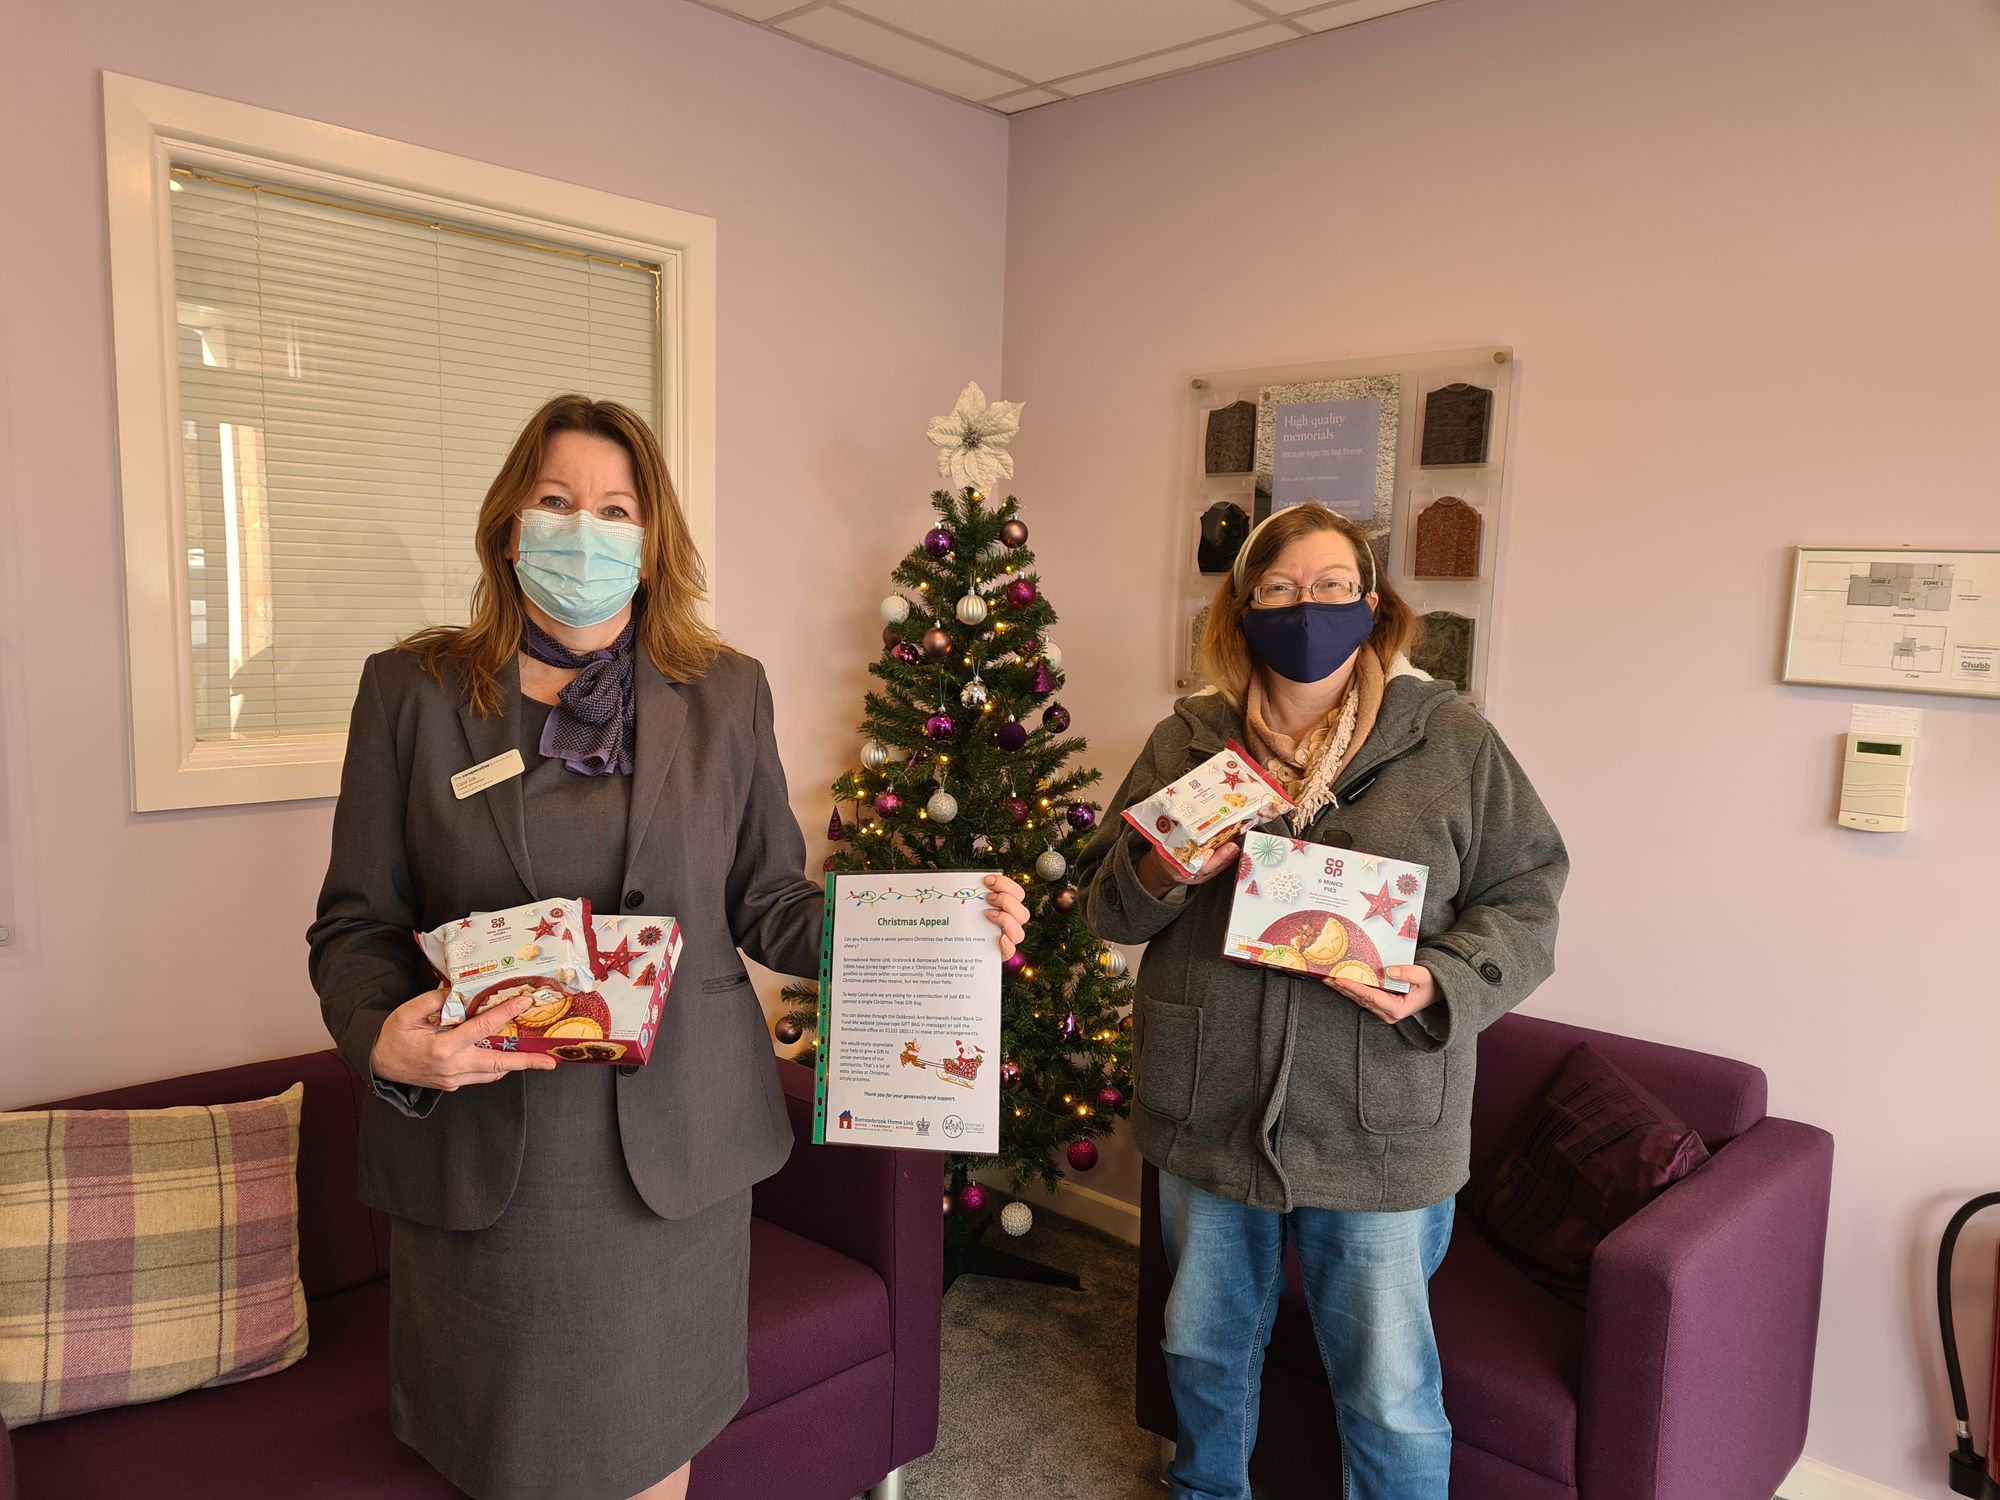 Borrowash funeral home supports local charity’s Christmas appeal bringing festive cheer